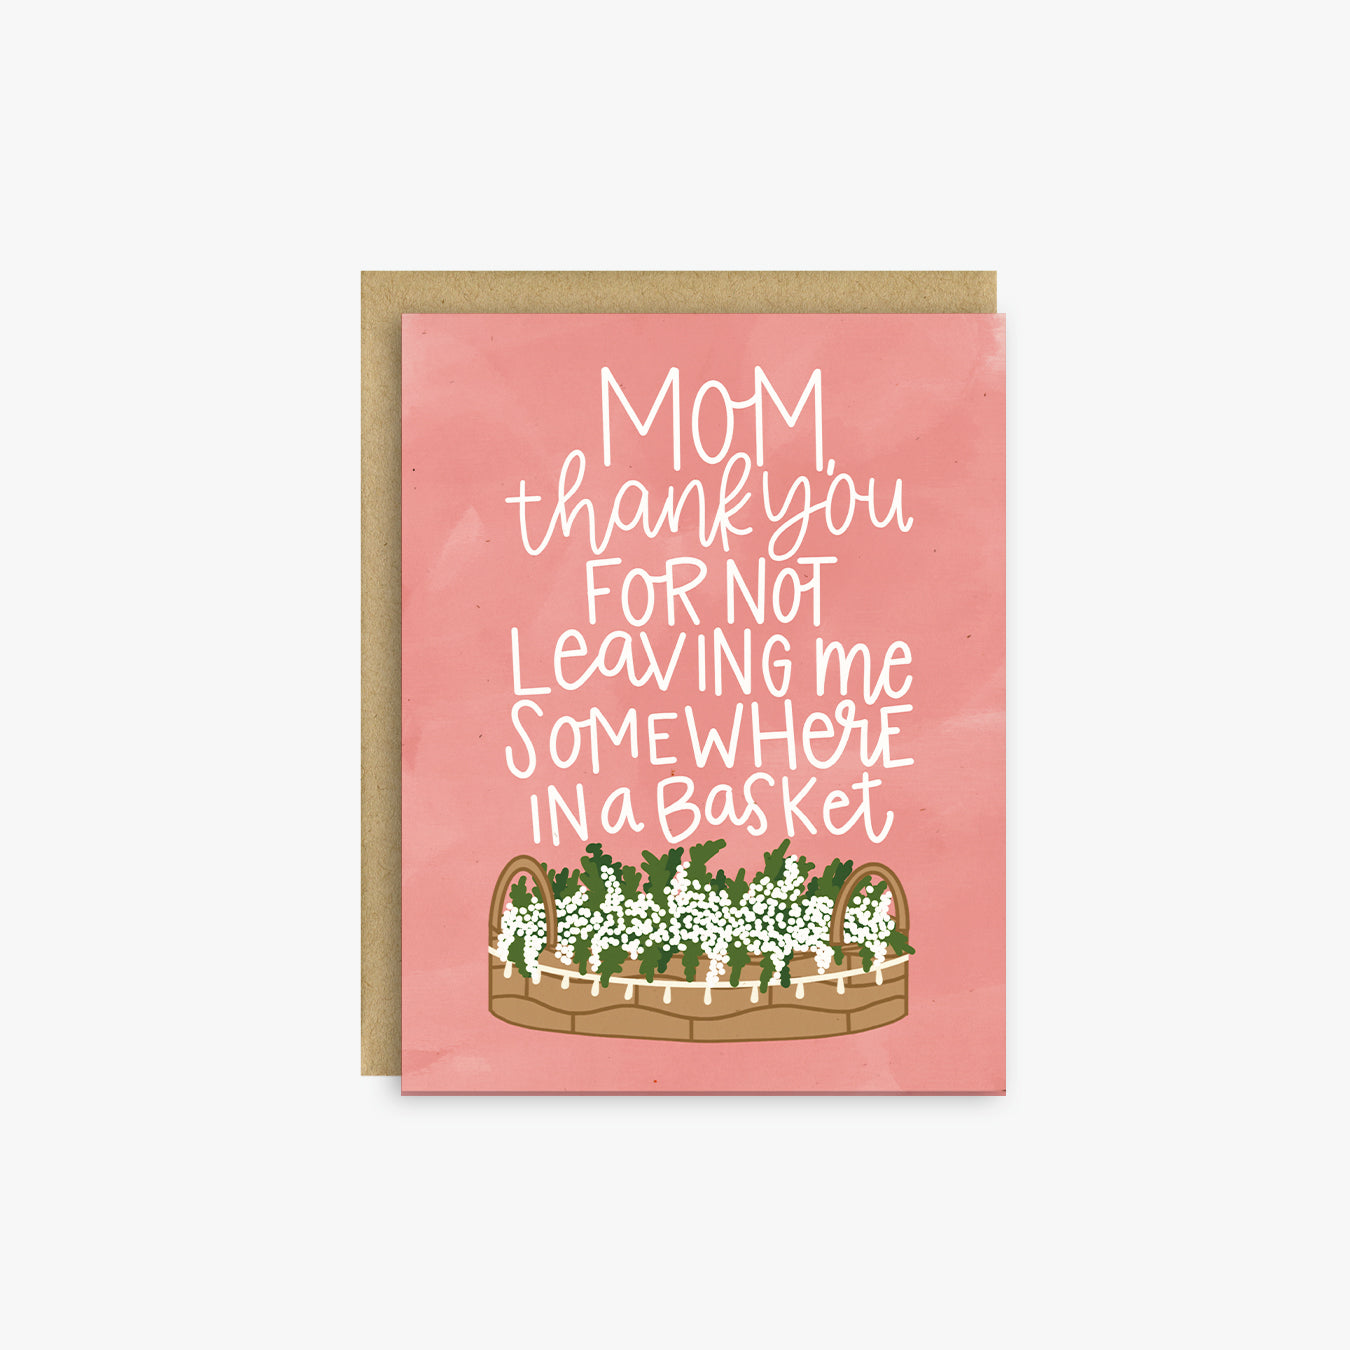 Somewhere In A Basket Mother's Day Card, Funny Card for Mom